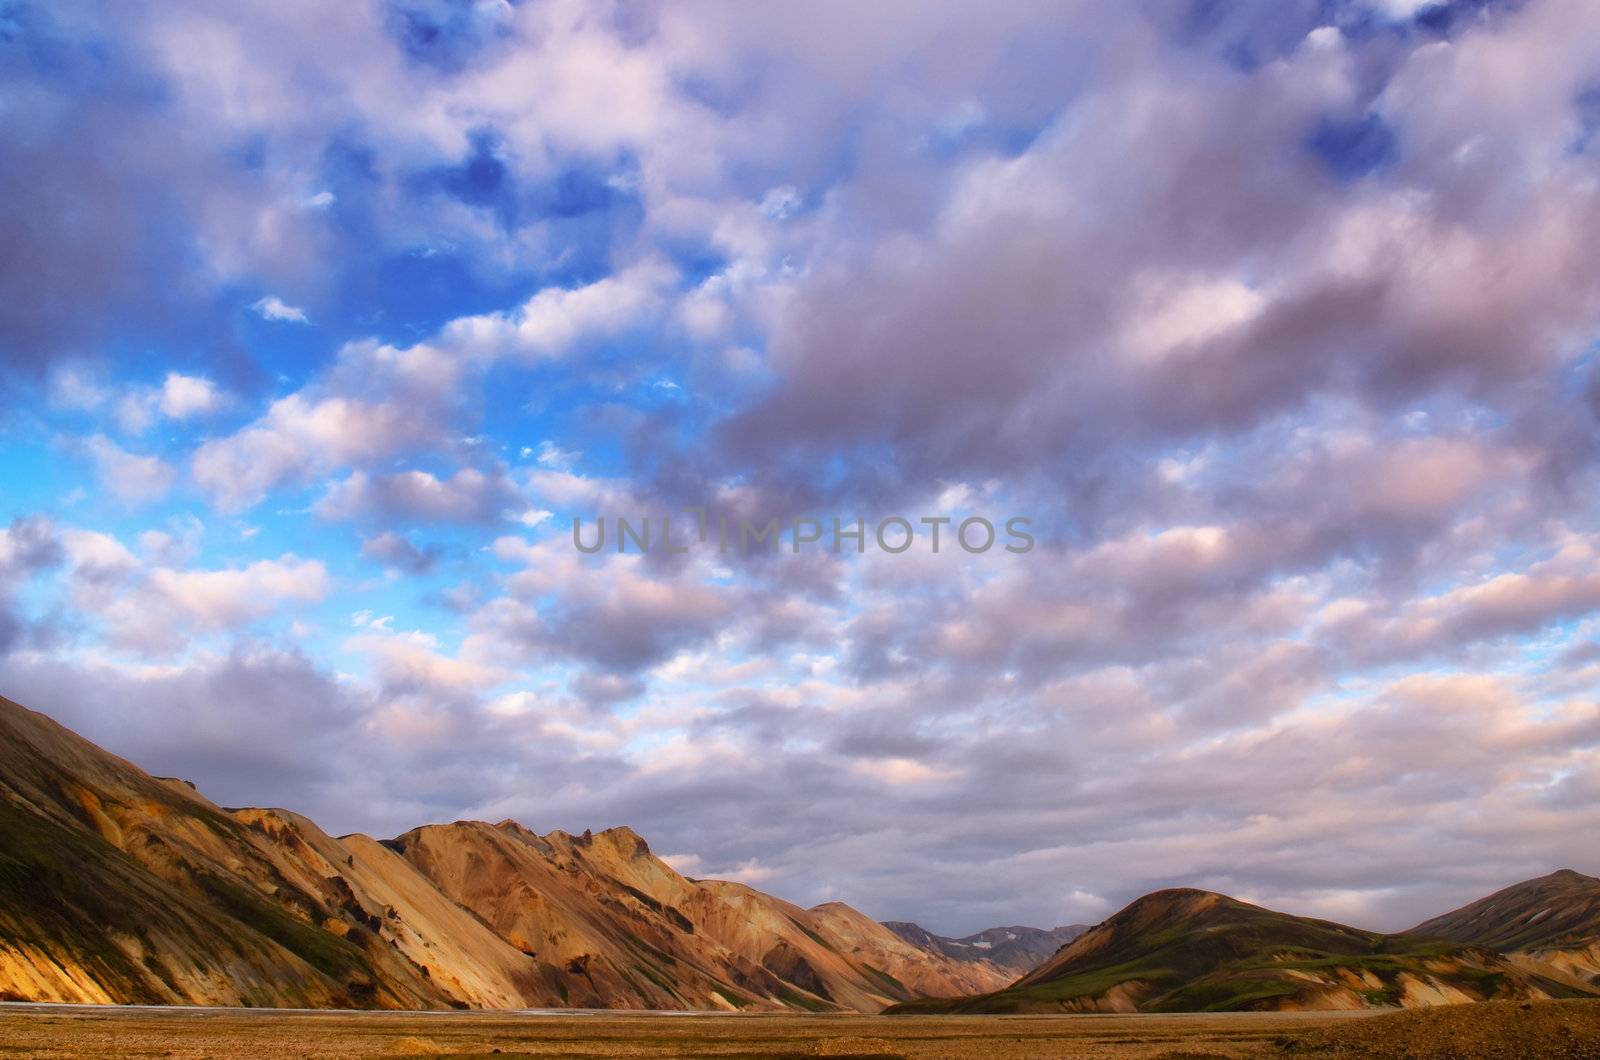 Landmannalaugar colorful mountains landscape view, Iceland by martinm303